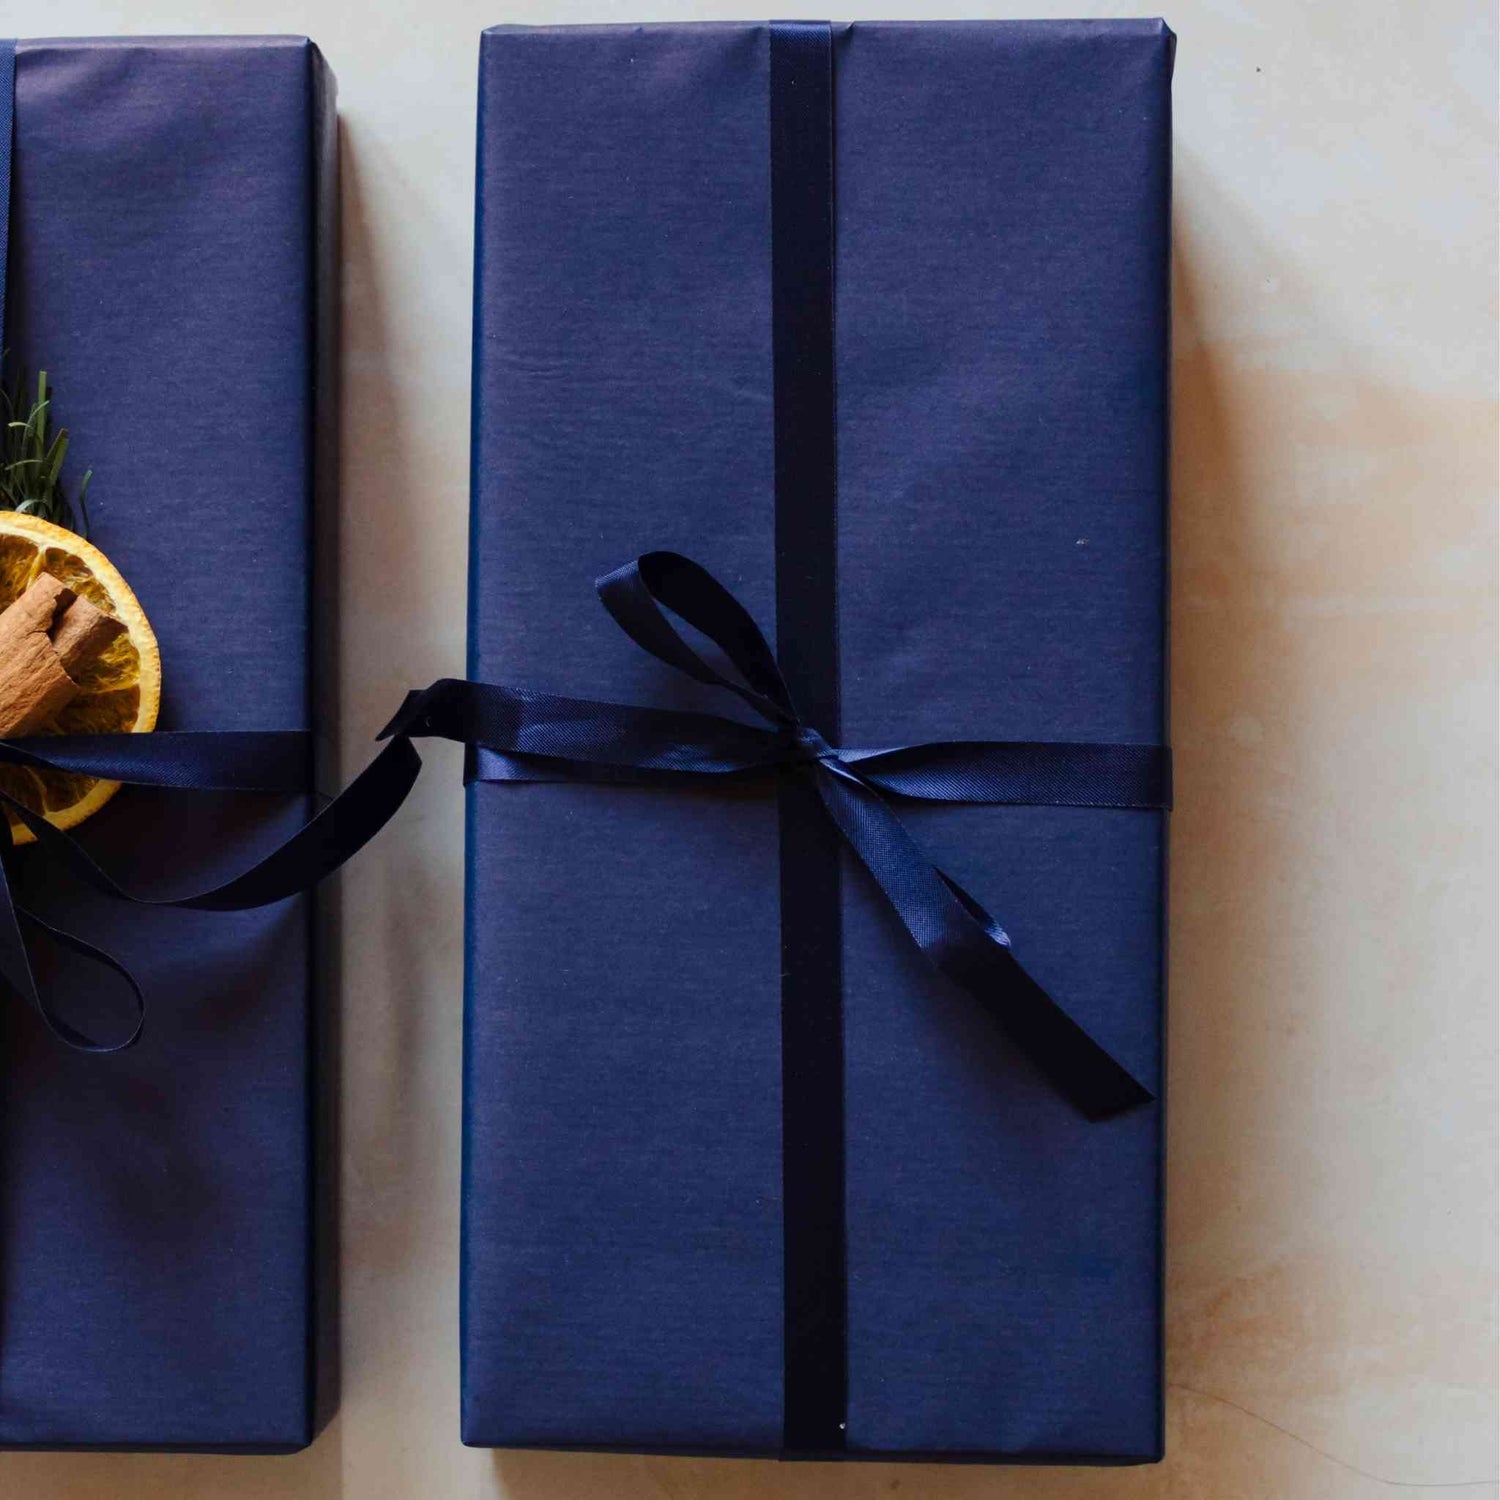 A wood smoke scented reed diffuser from the Home County Co. is shown with luxury Gift Wrap. The reed diffuser is wrapped in luxury navy wrapping paper secured with navy ribbon.